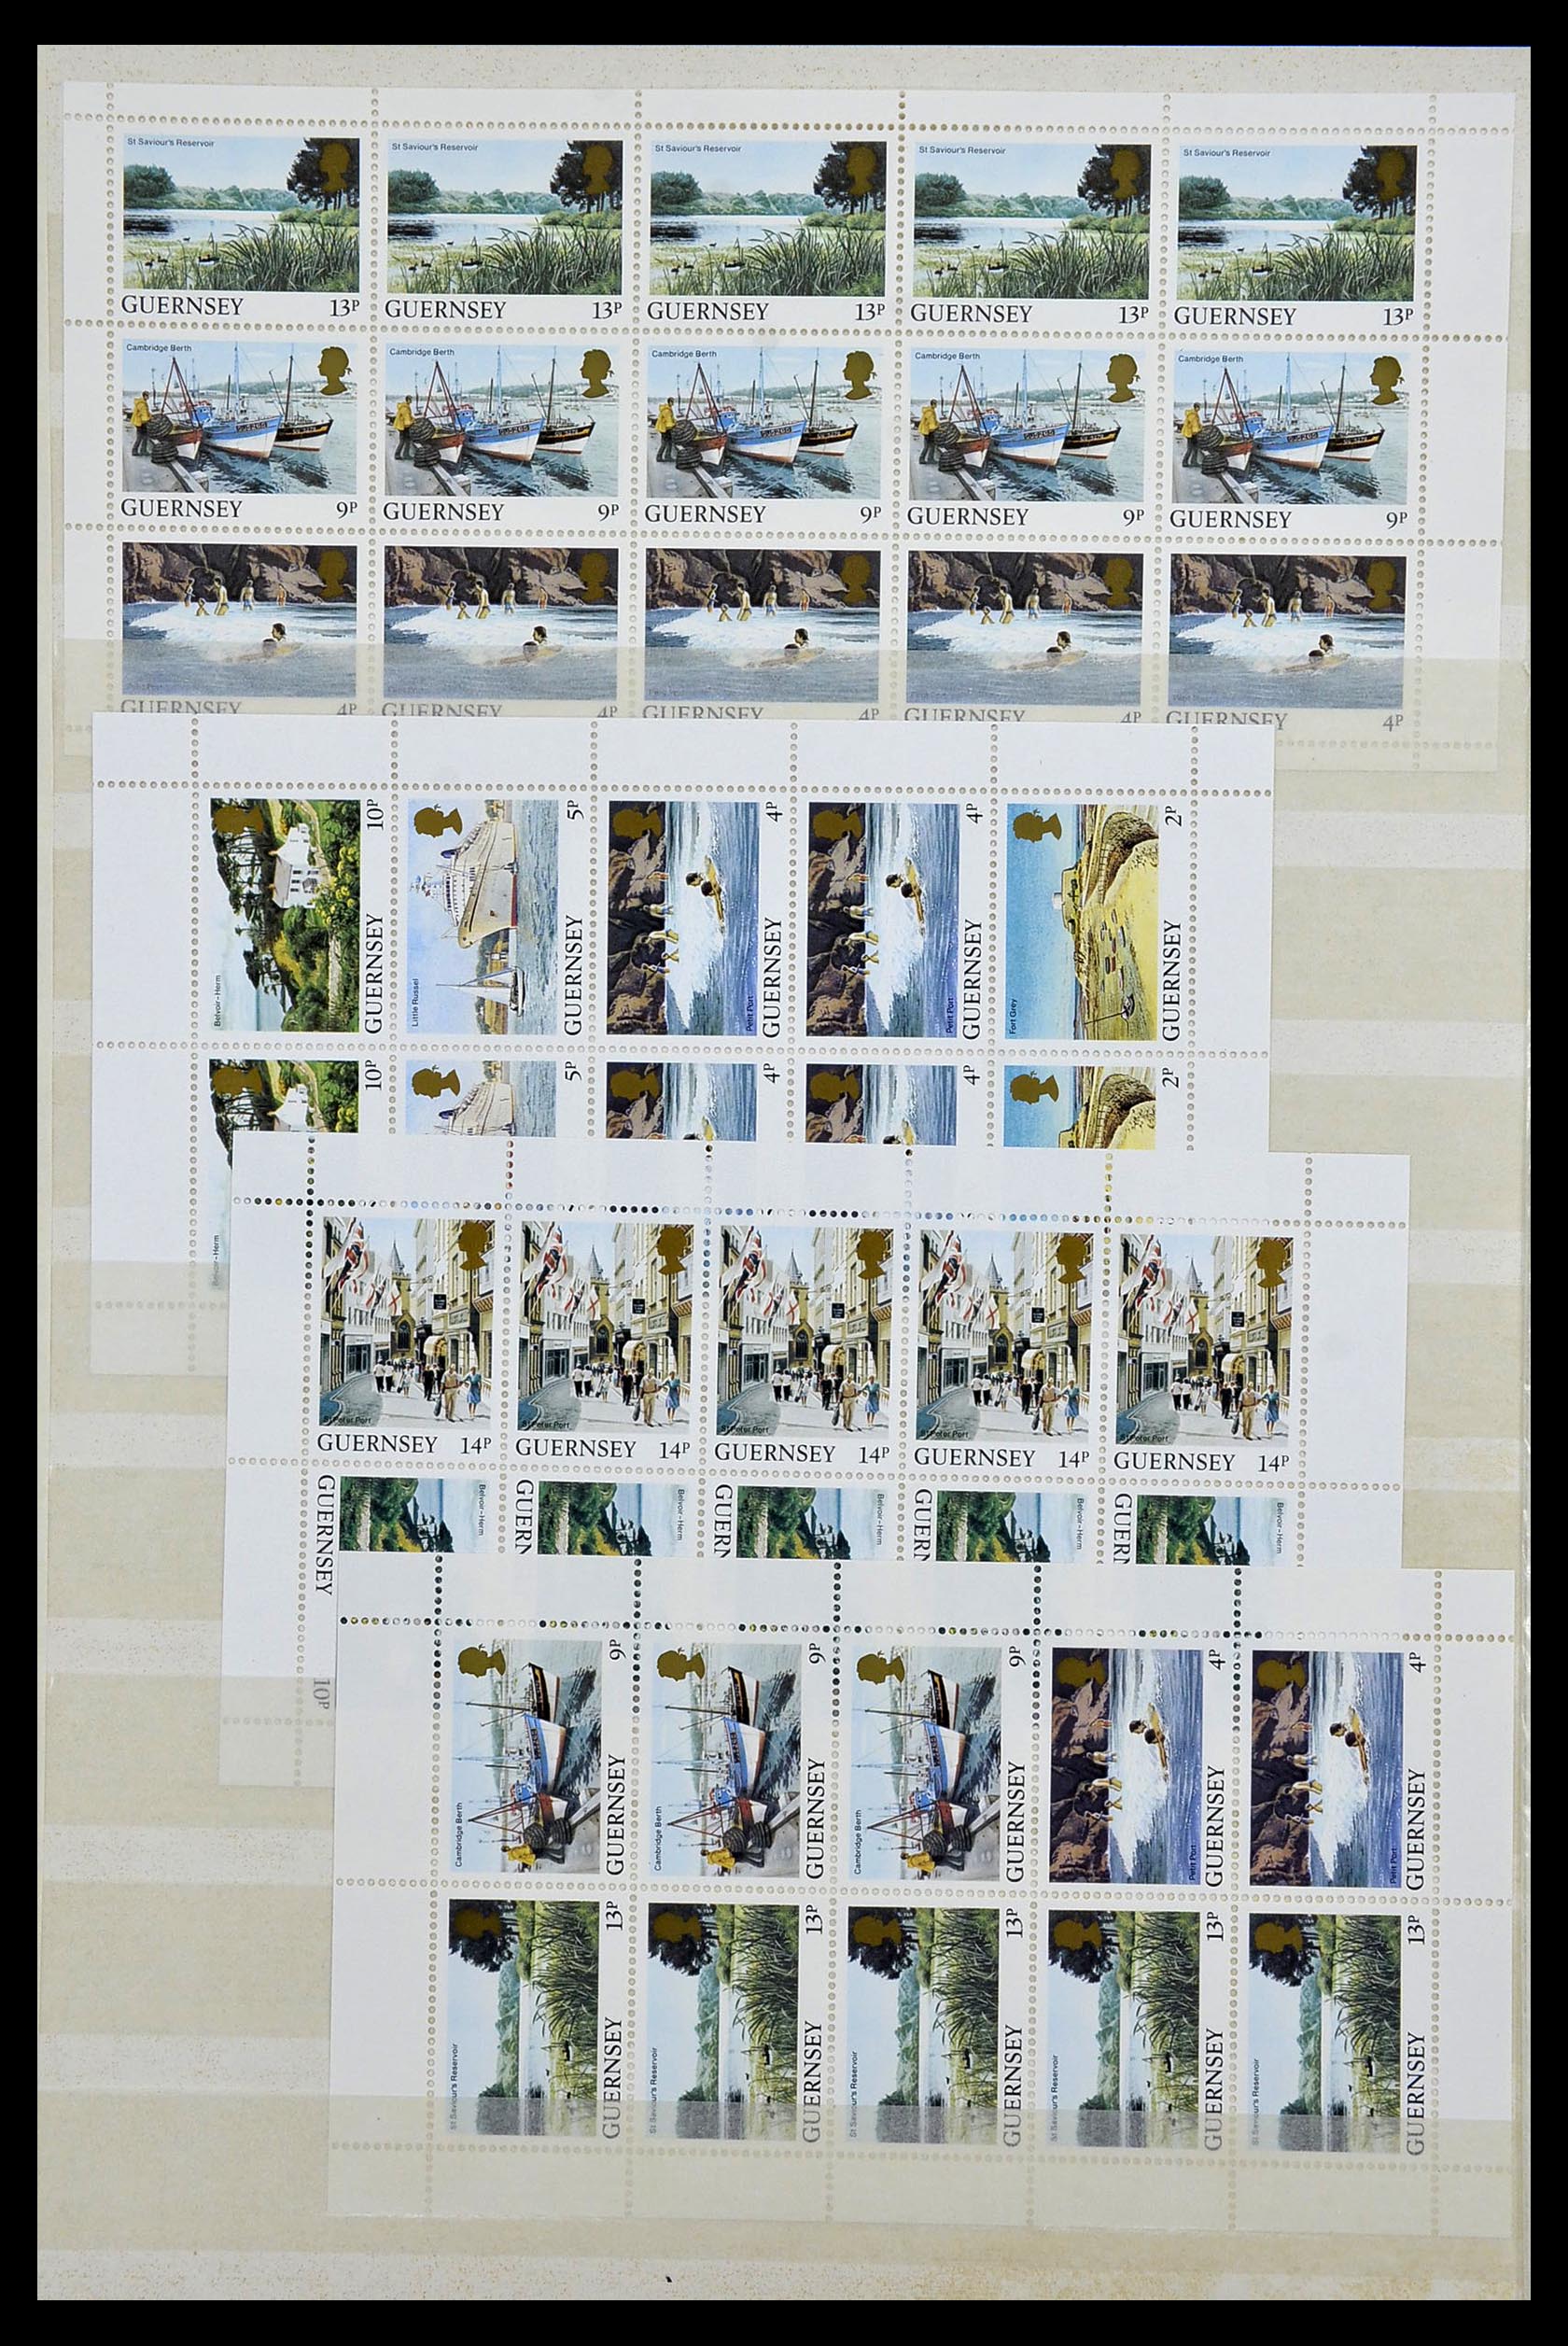 34045 048 - Stamp collection 34045 Western Europe souvenir sheets 1973-1986.